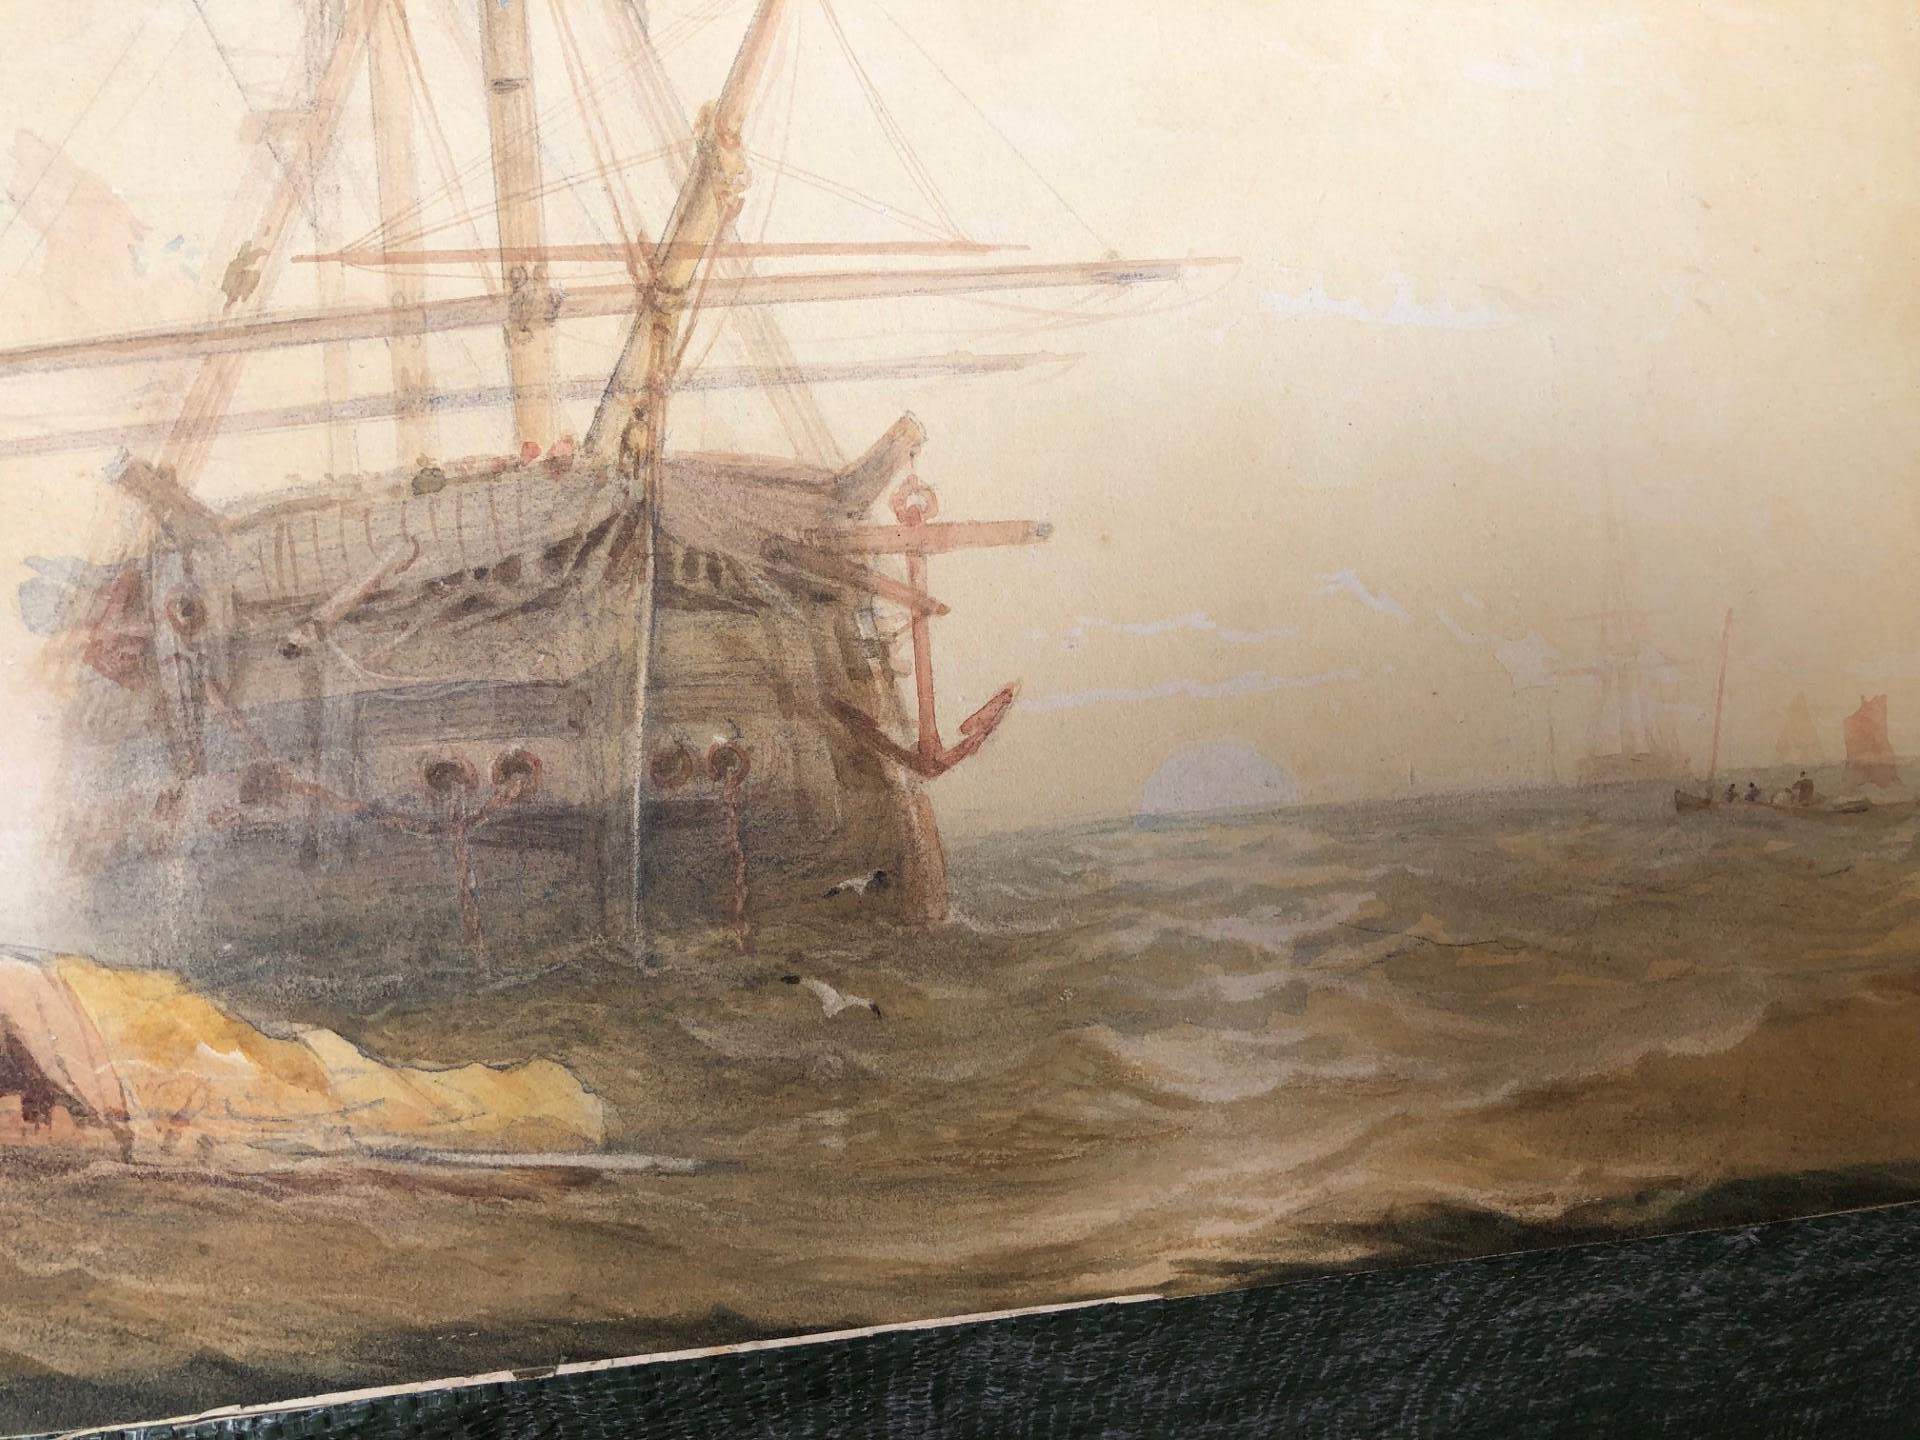 An absolute gem by one of the top rate 19th Century Marine Painters, up there with Turner this one!

JWC was a Newcastle artist born in 1800 and died in 1868.
Born in Newcastle-upon-Tyne, John Wilson Carmichael was the son of a ship's carpenter and